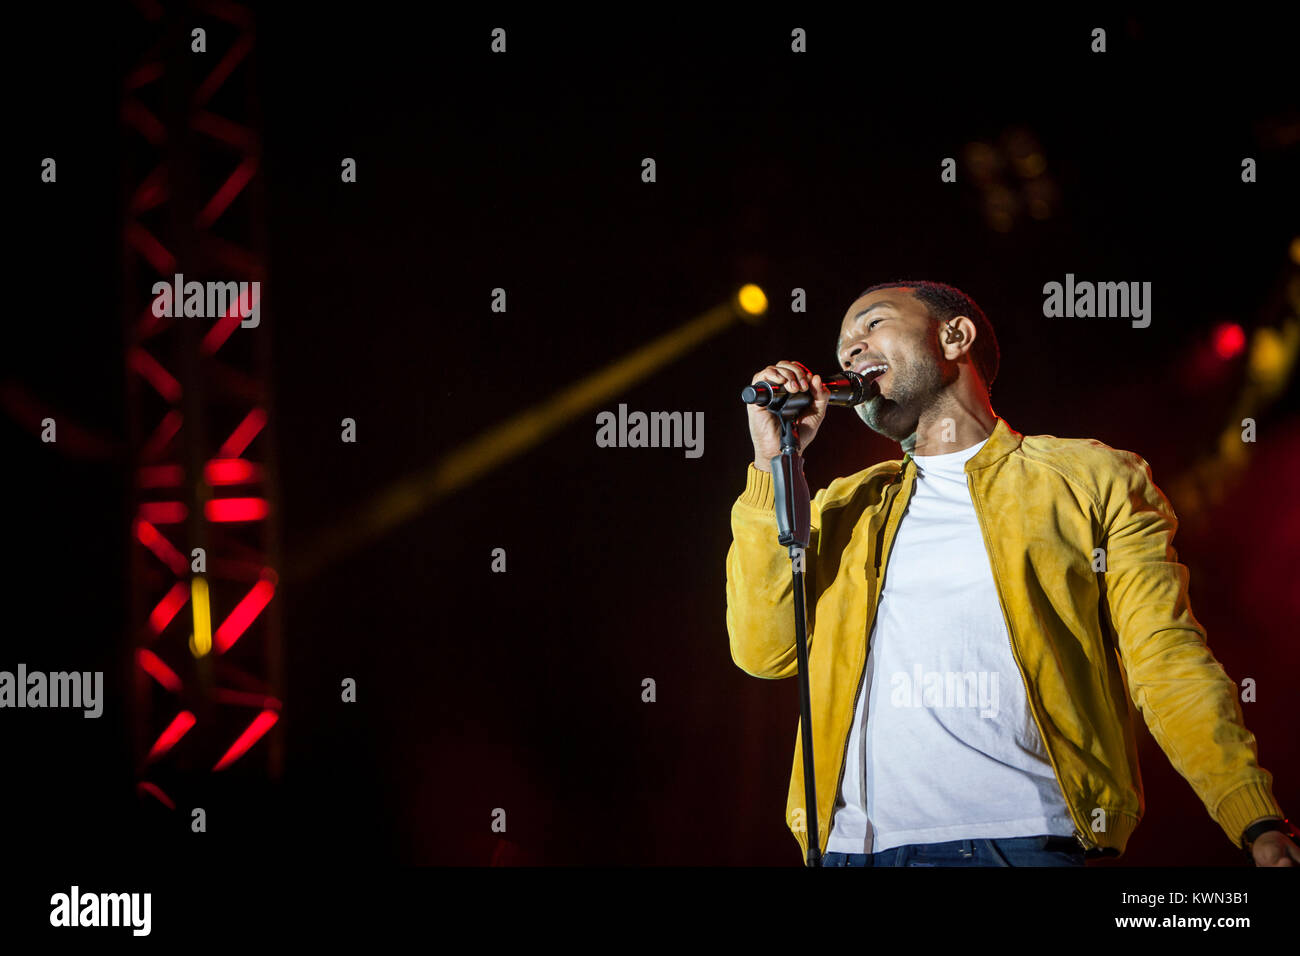 The American singer and actor John Legend pictured live on stage at Splash Festival in Germany, Denmark. Stock Photo